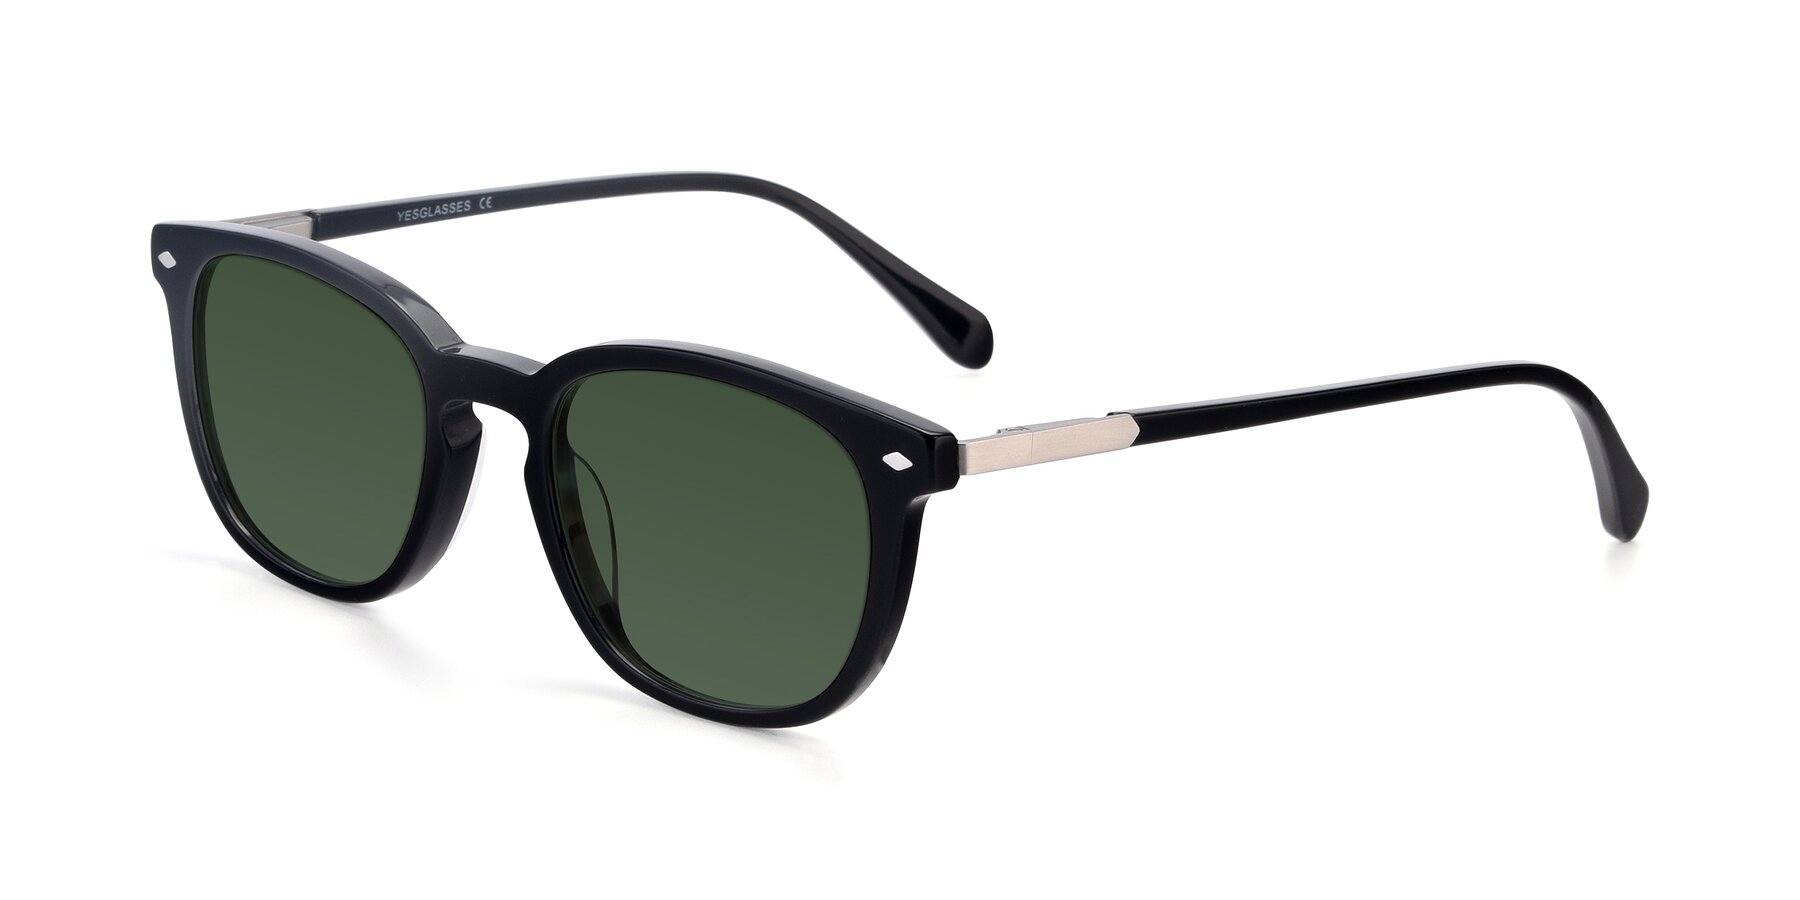 Angle of 17578 in Black with Green Tinted Lenses